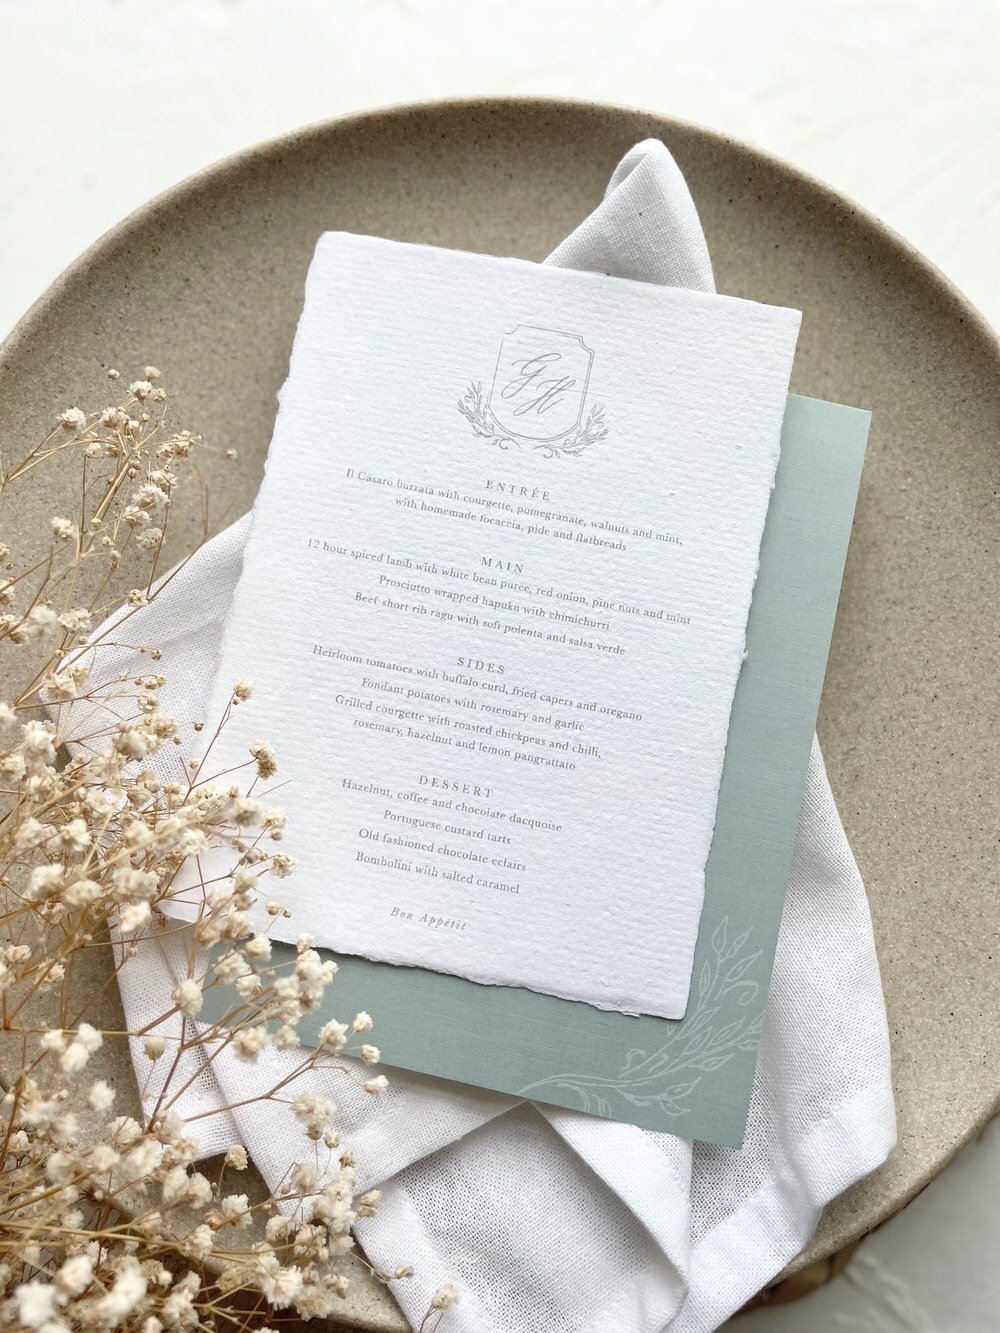 Just My Type Wedding Invitation Stationery NZ Wedding Menu Place Name Table Number3133.jpg